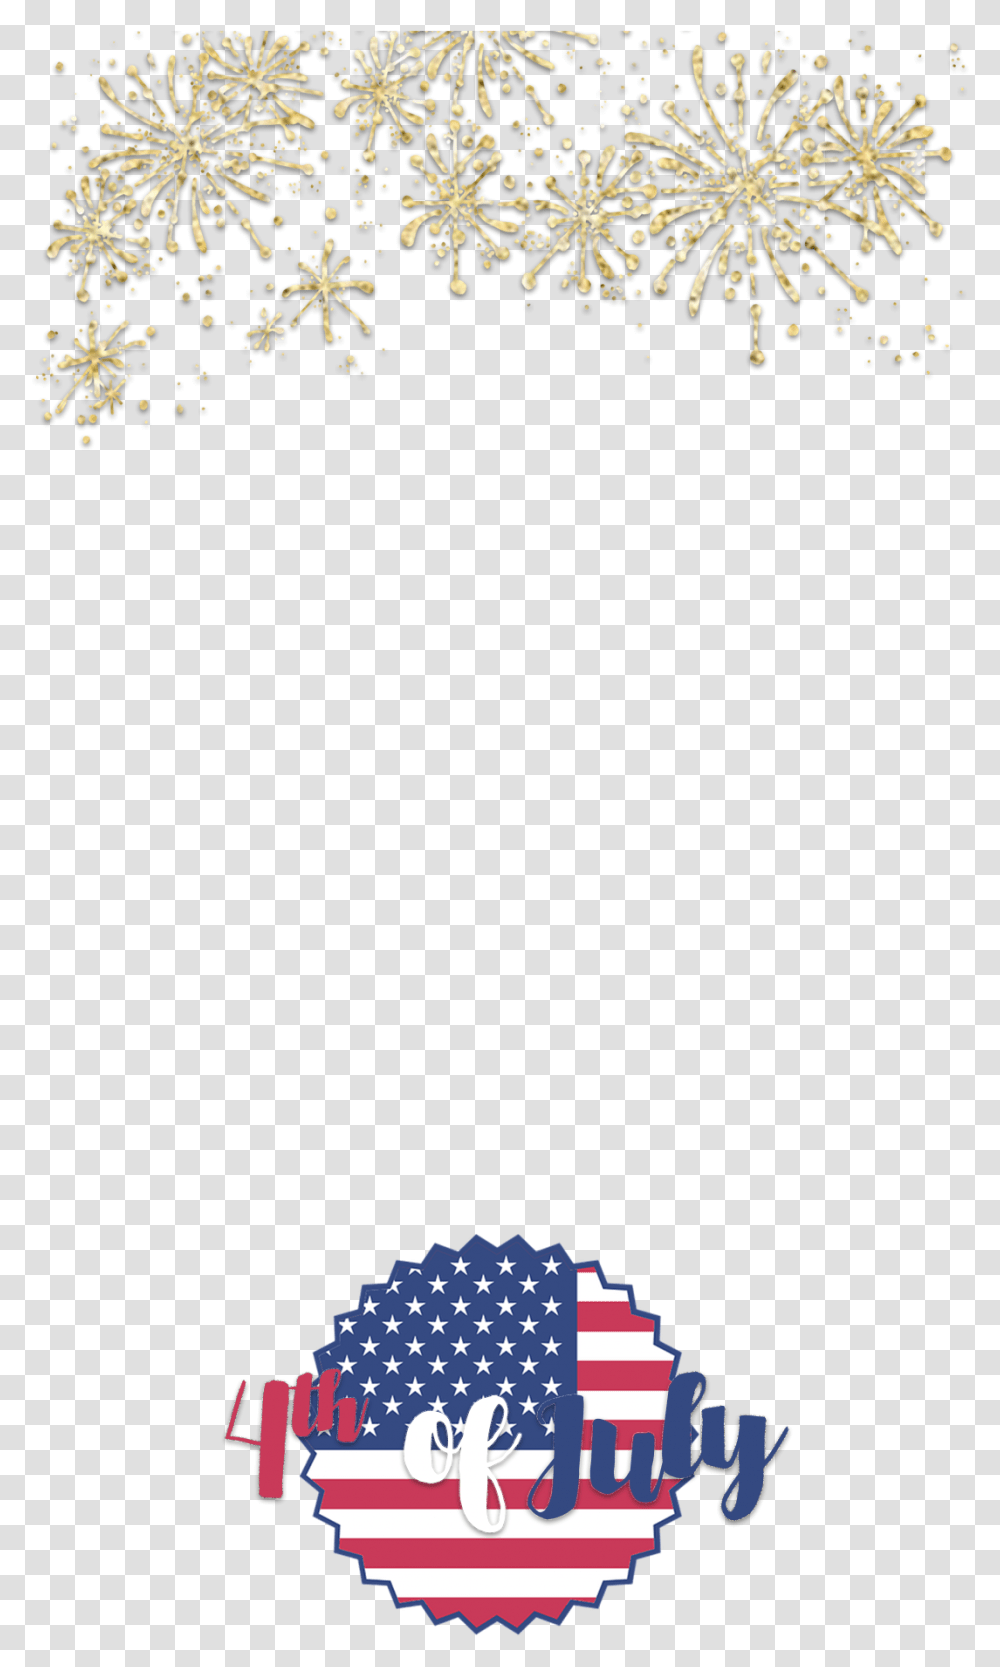 Flag Of The United States, Outdoors, Nature, Fireworks, Night Transparent Png